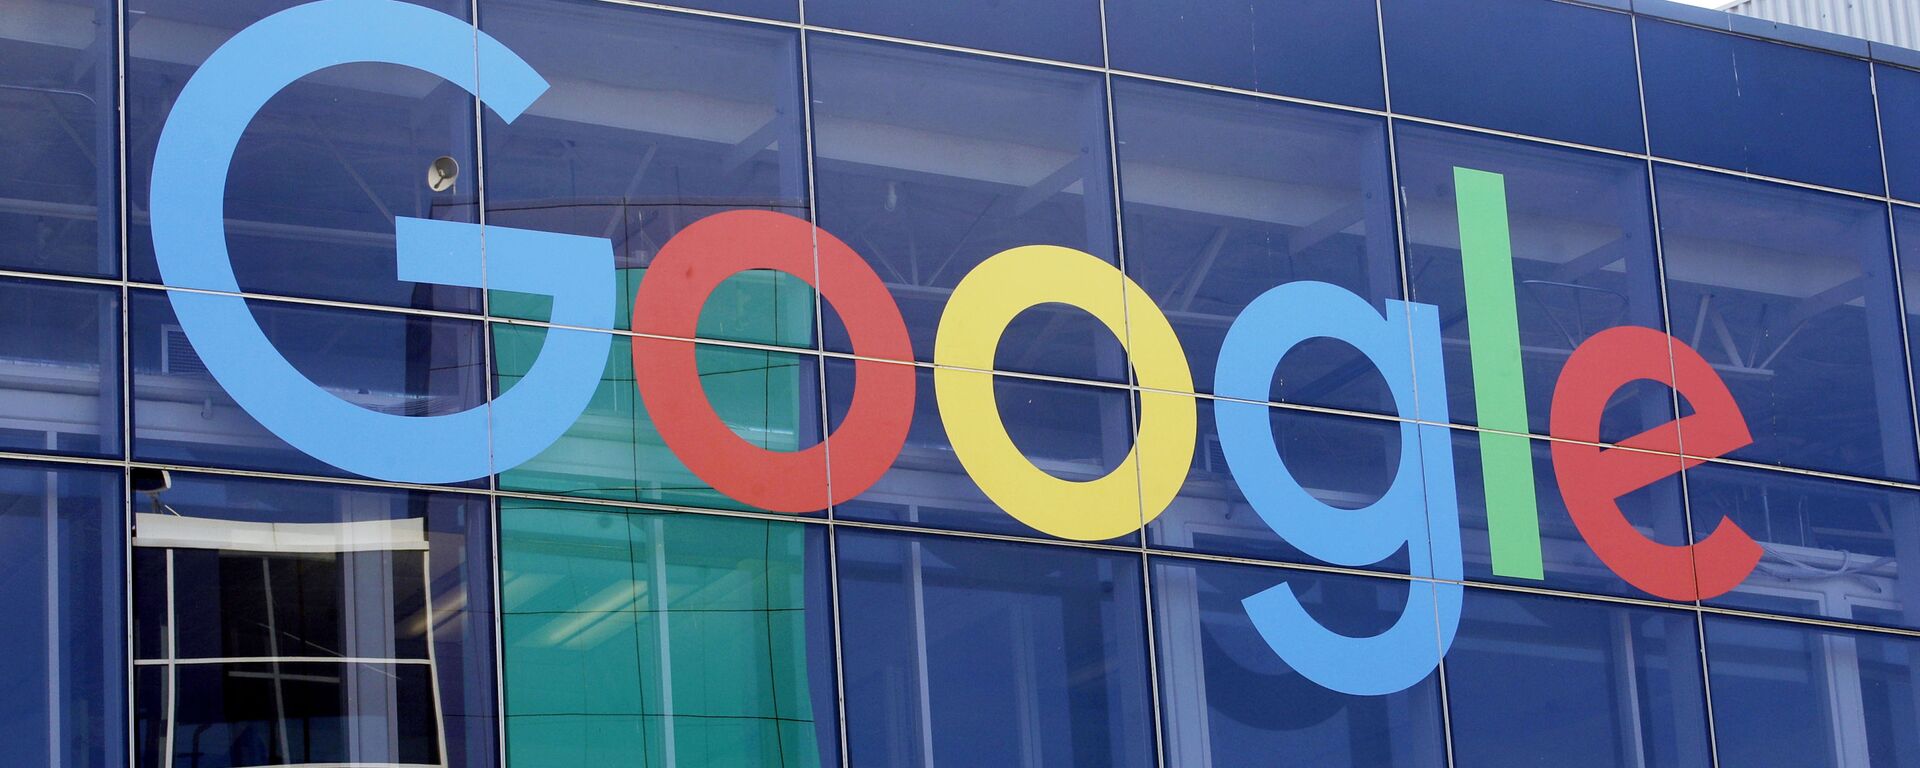 In this Sept. 24, 2019, file photo a sign is shown on a Google building at their campus in Mountain View, Calif. Google is formally pushing back on antitrust claims brought against it by the Justice Department two months ago. - Sputnik International, 1920, 03.02.2023